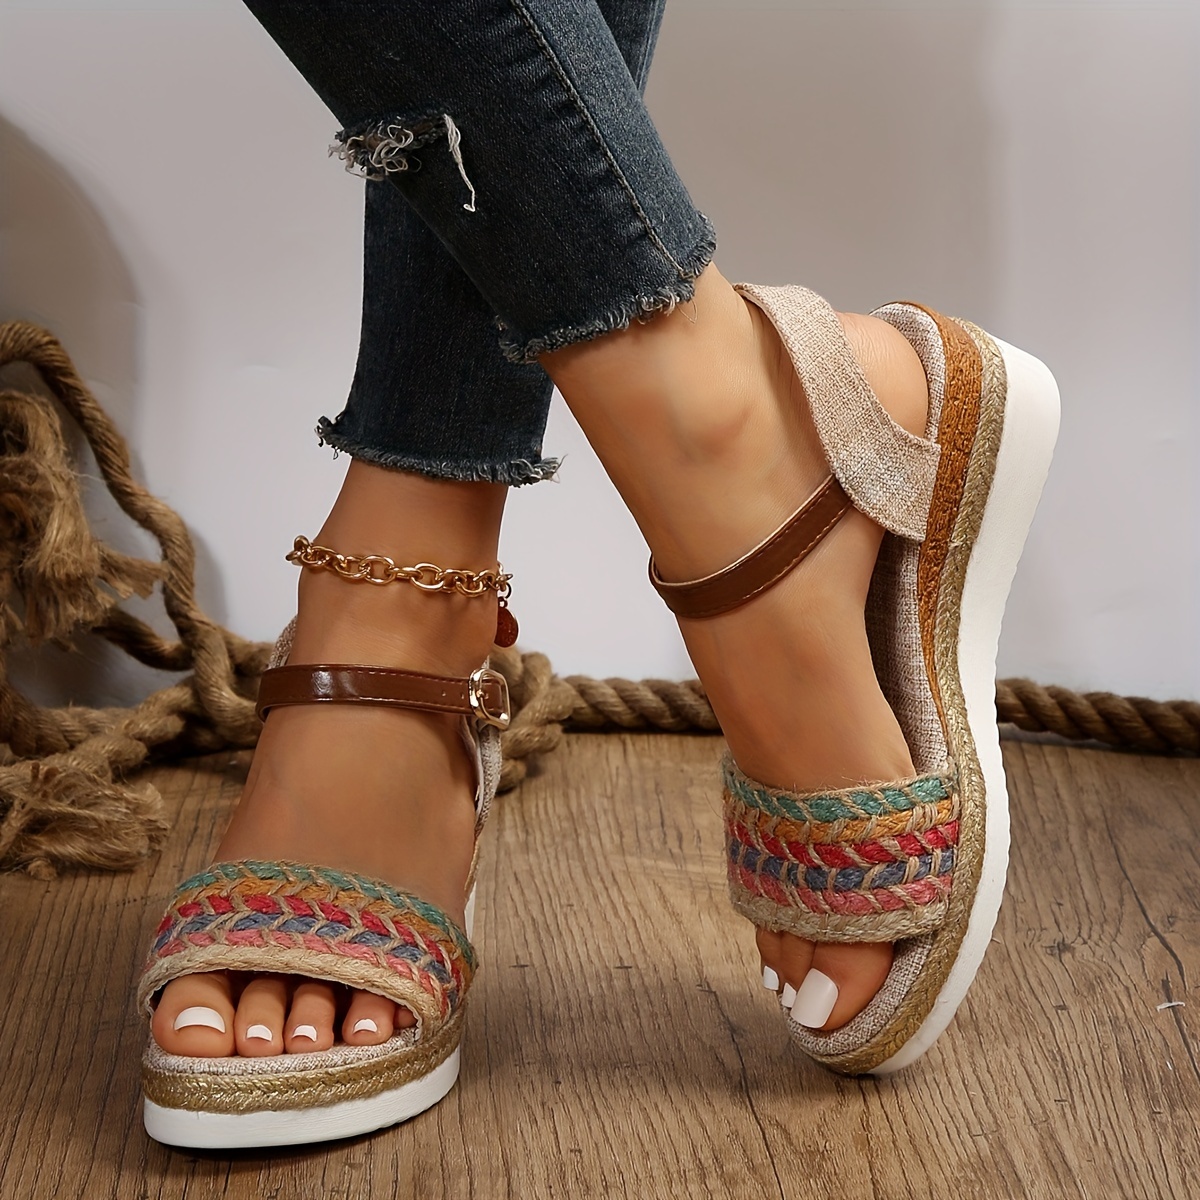 Women's Vintage Beach Style Wedge Sandals With Chunky Braided Jute